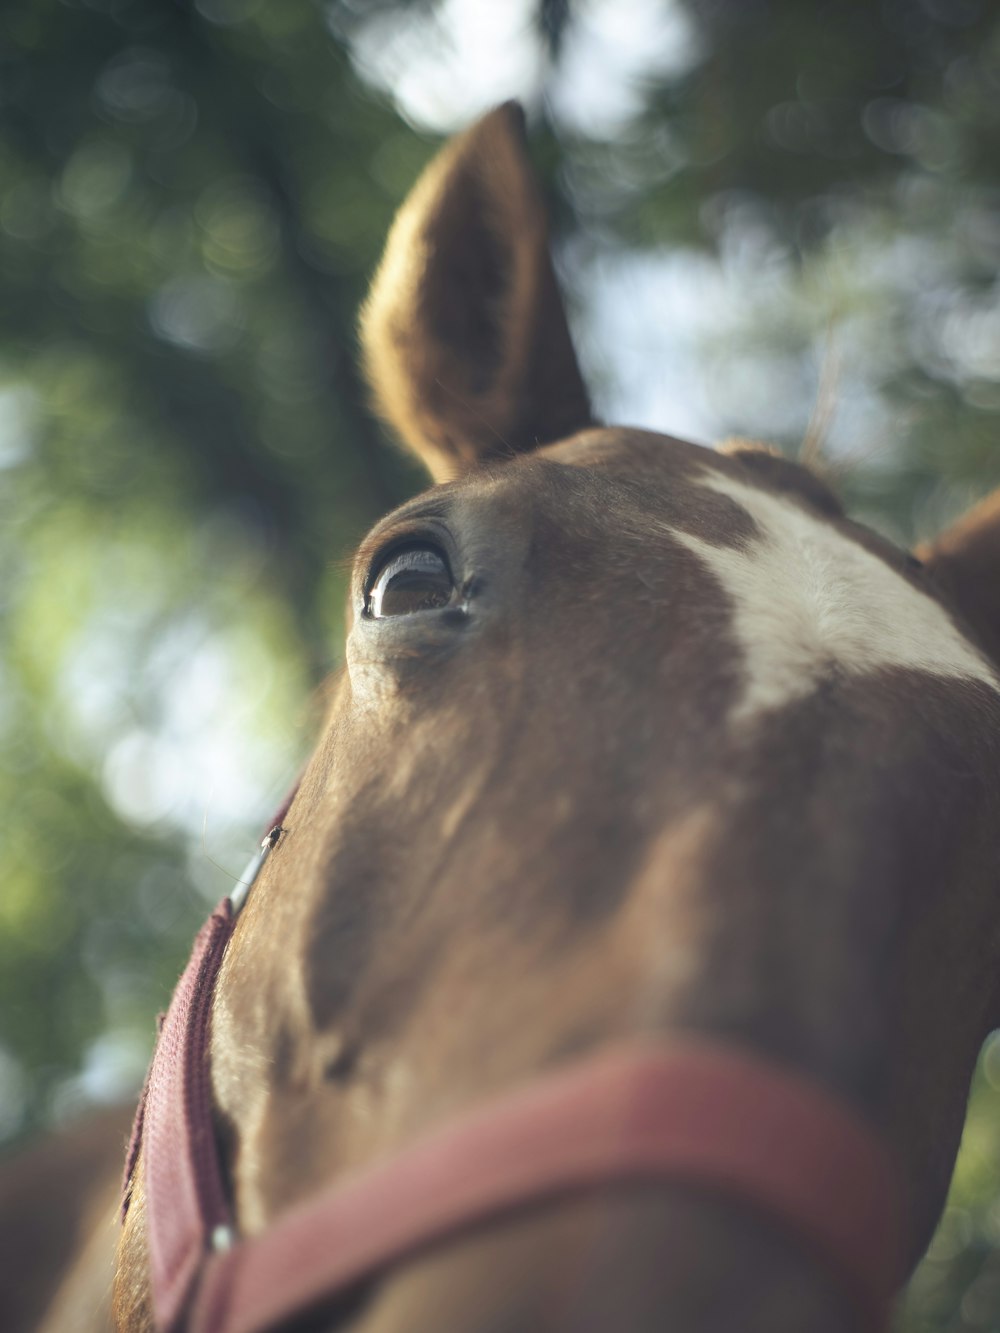 a close up of a horse's head with trees in the background